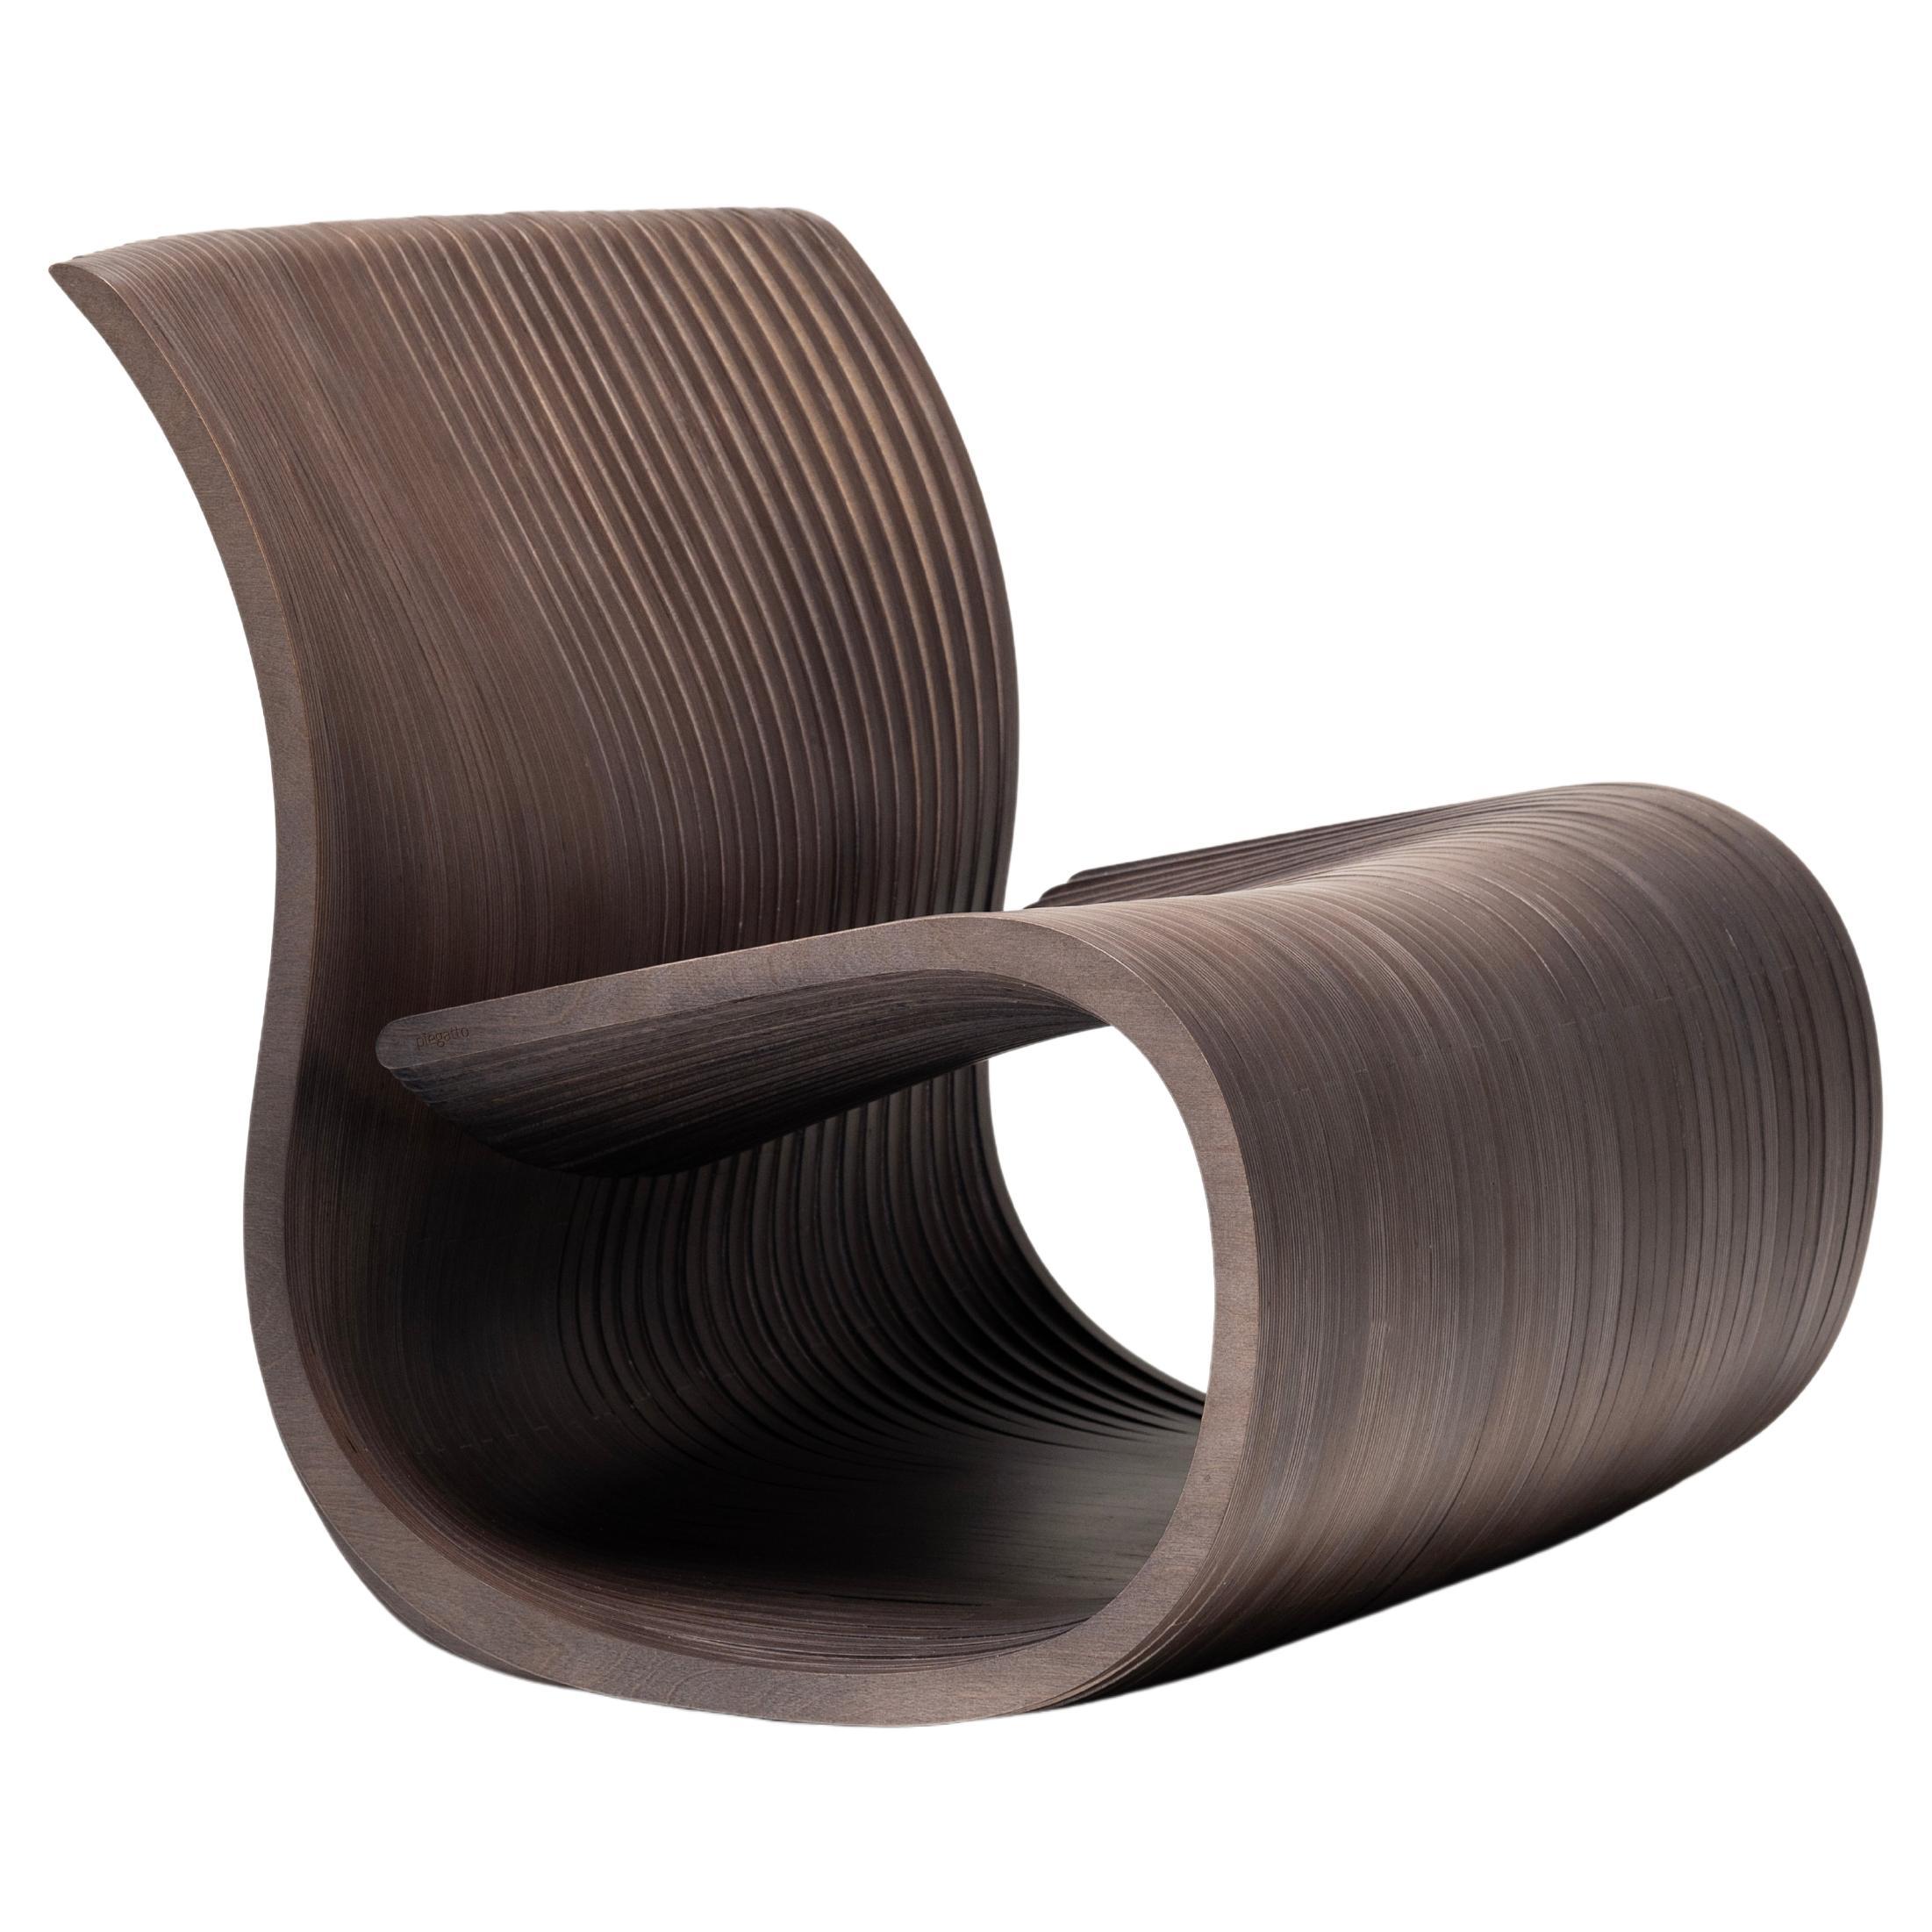 Riddle Chair by Piegatto, a Sculptural Contemporary Chair